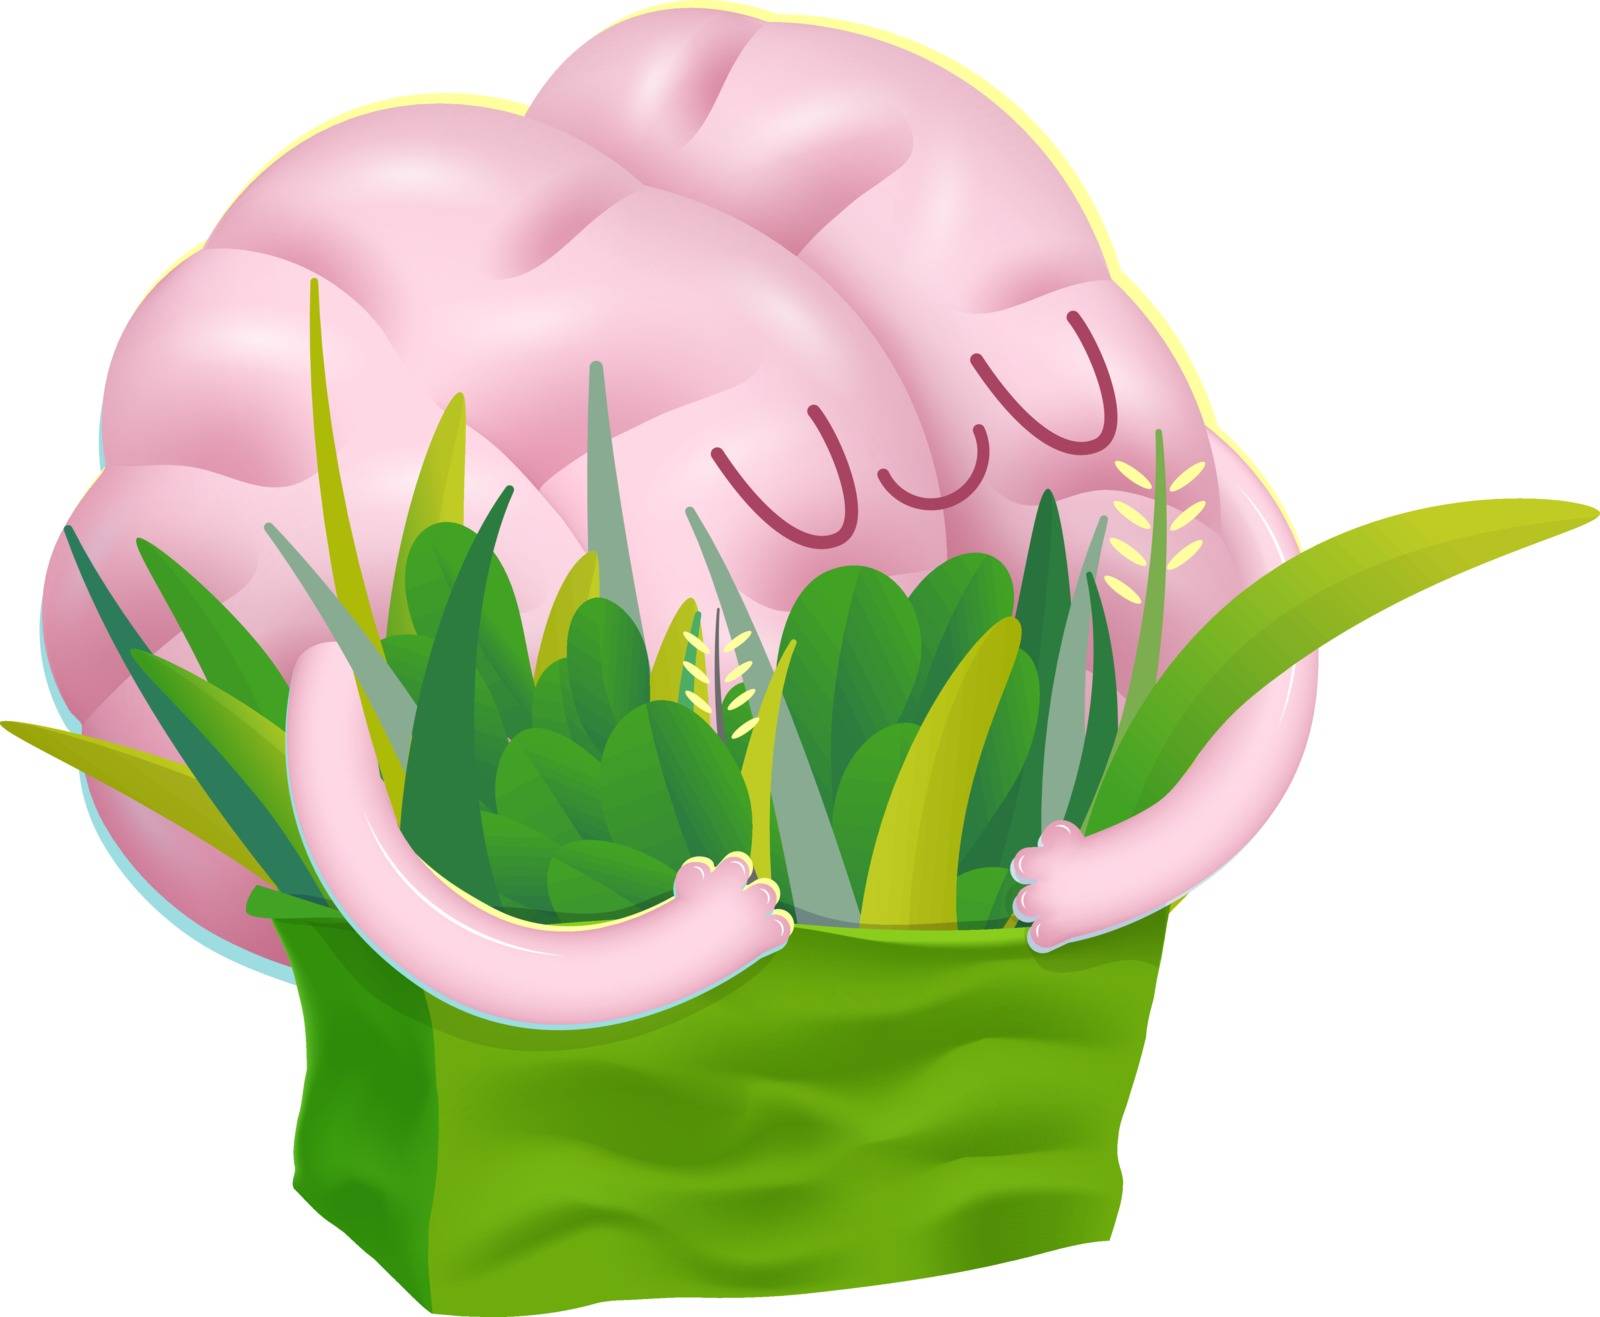 Feed your brain  - a vector  cartoon illustration of enjoining brain hugging a bag of greens. Part of a Brain collection.